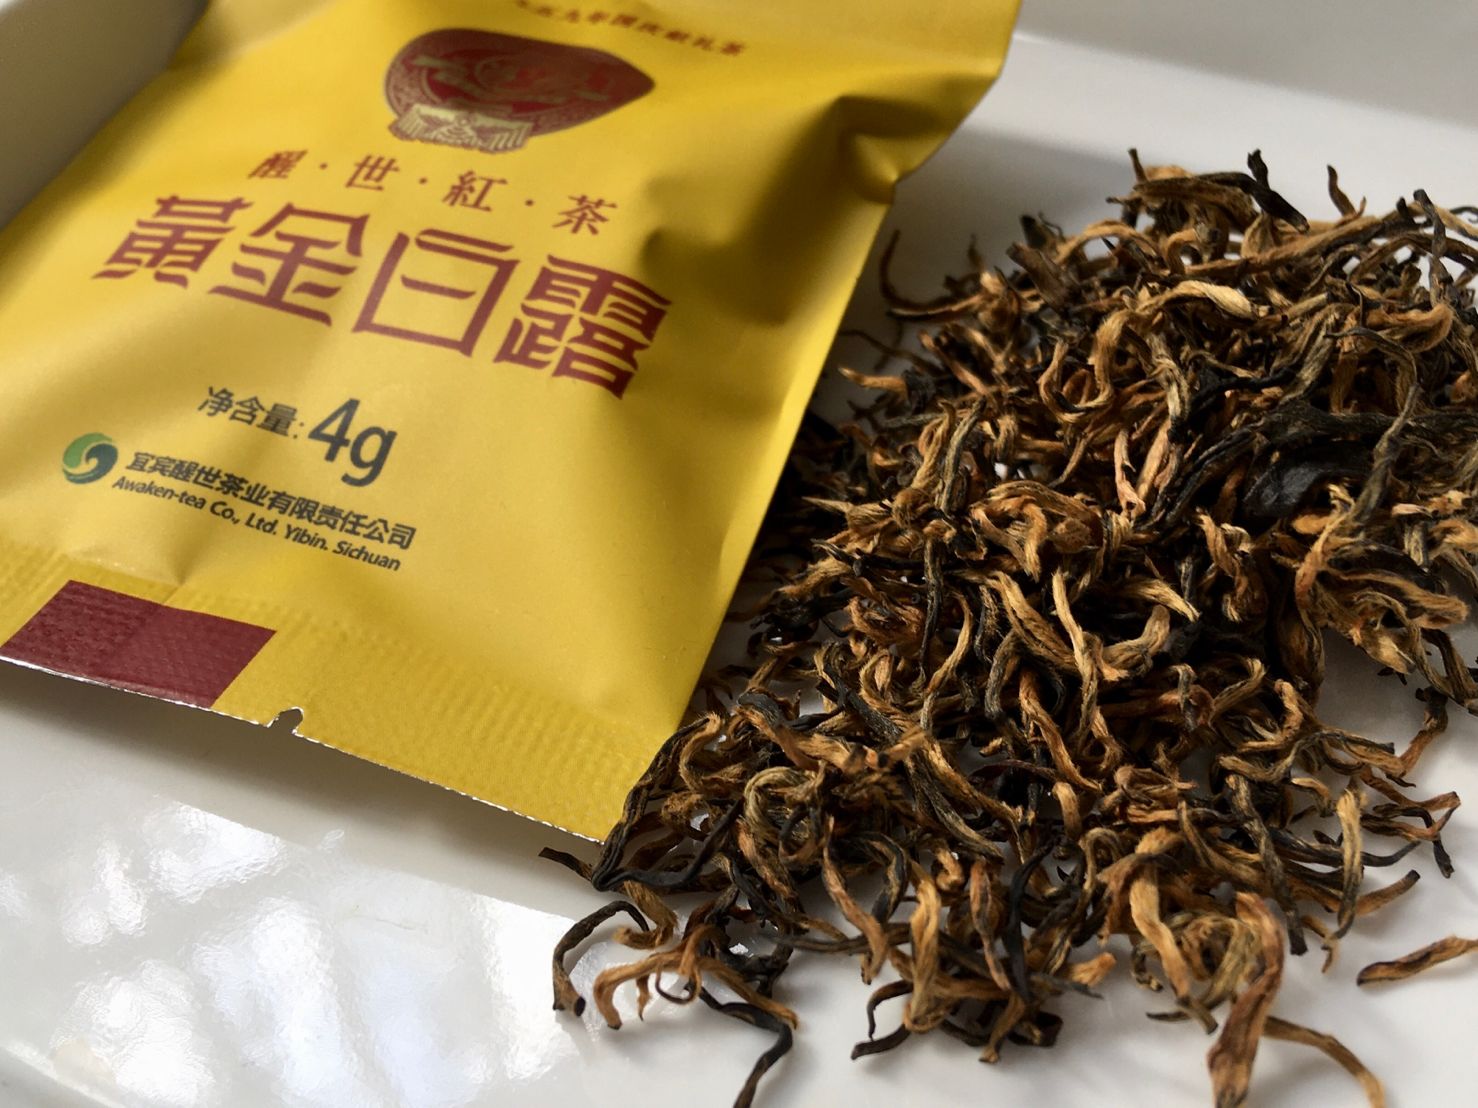 An Obscure and Eclectic Black Tea From China